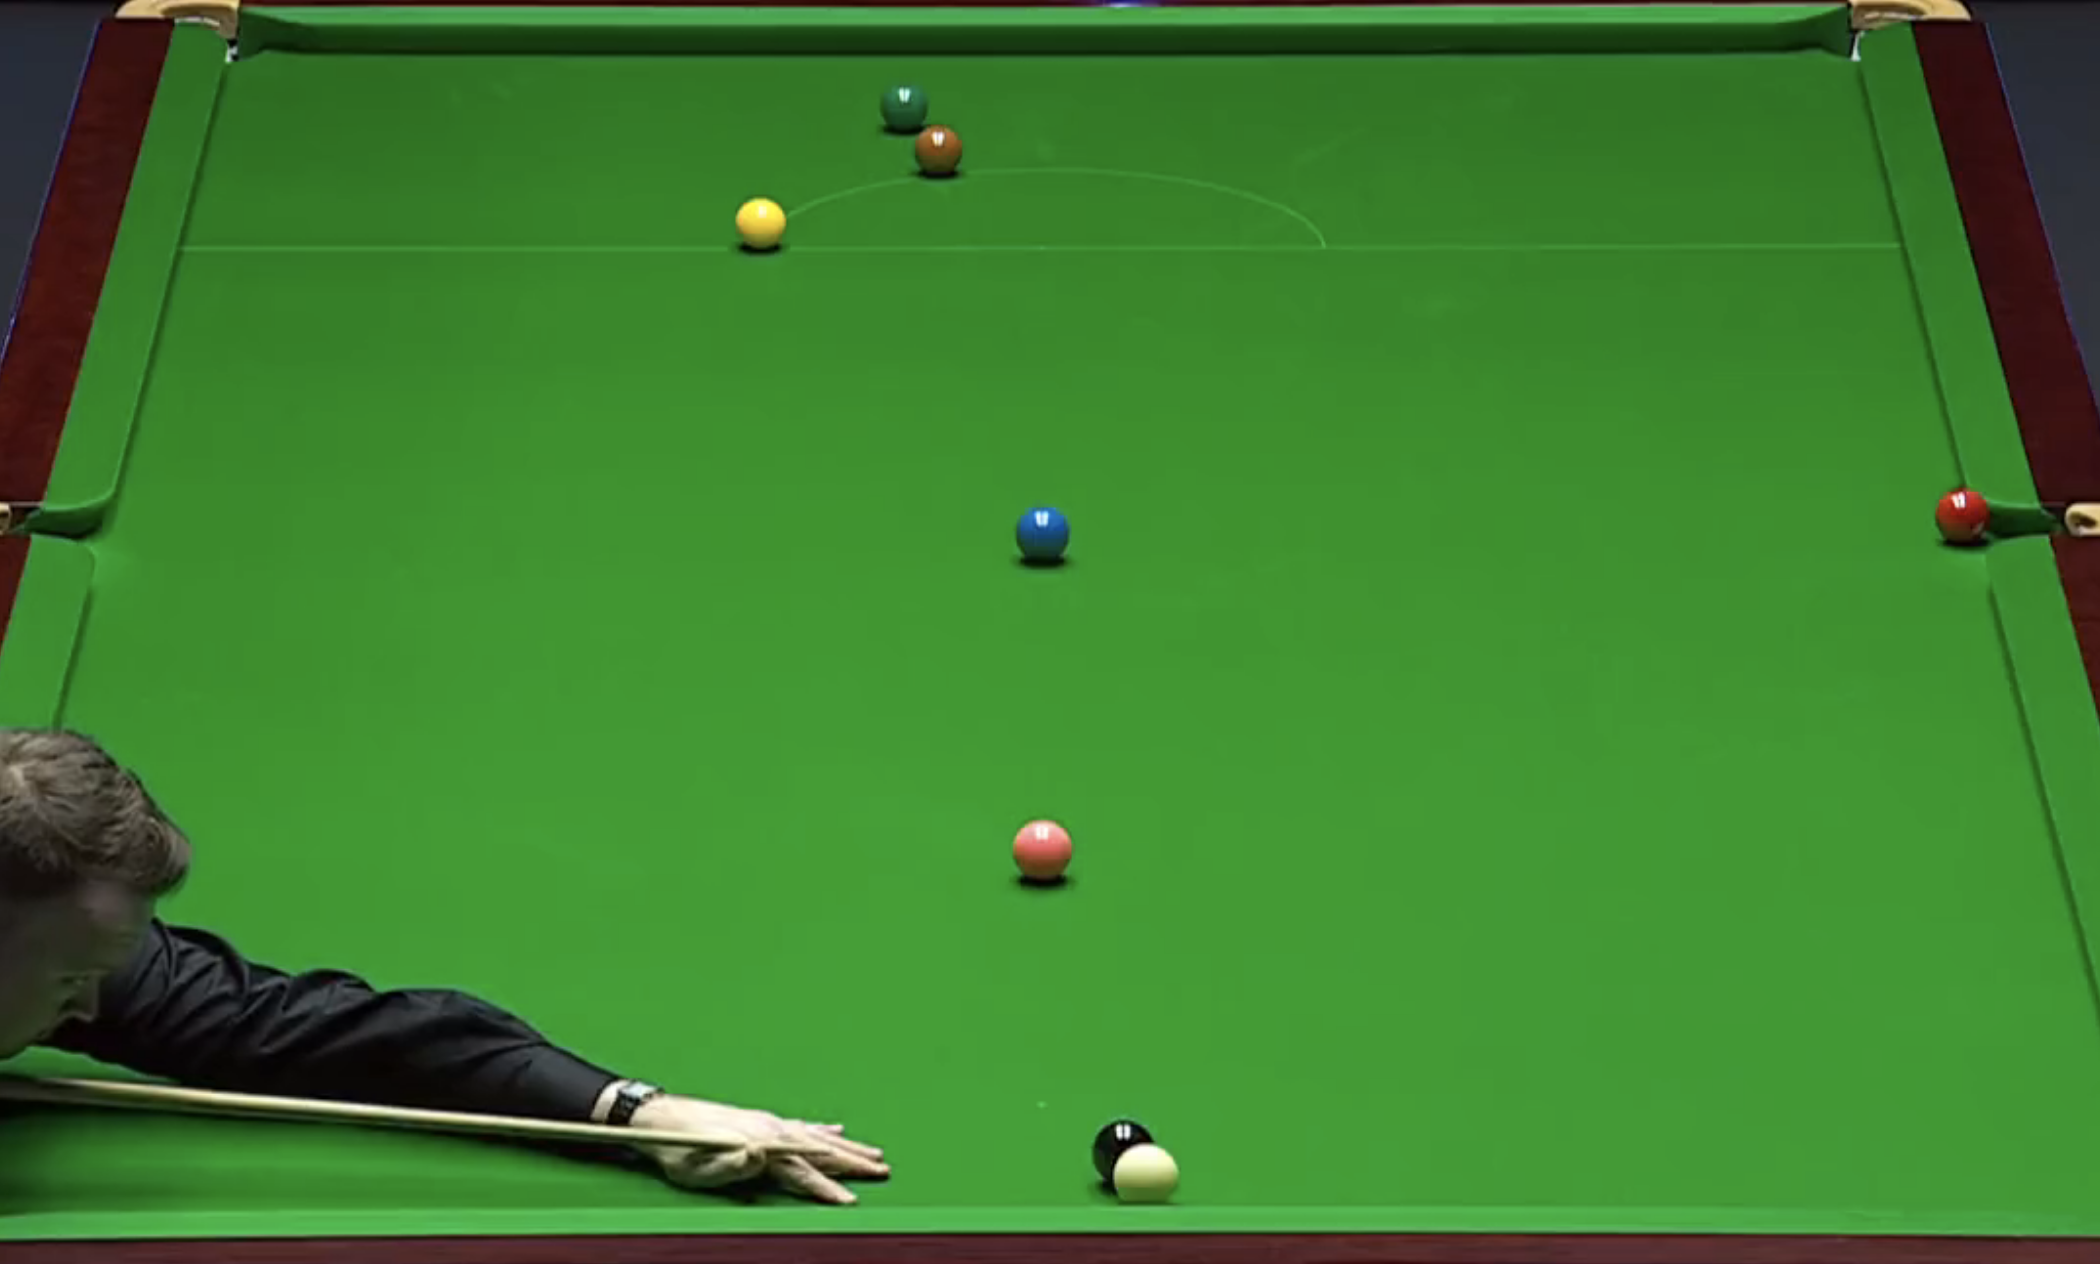 Shaun Murphy potted the final red from this position